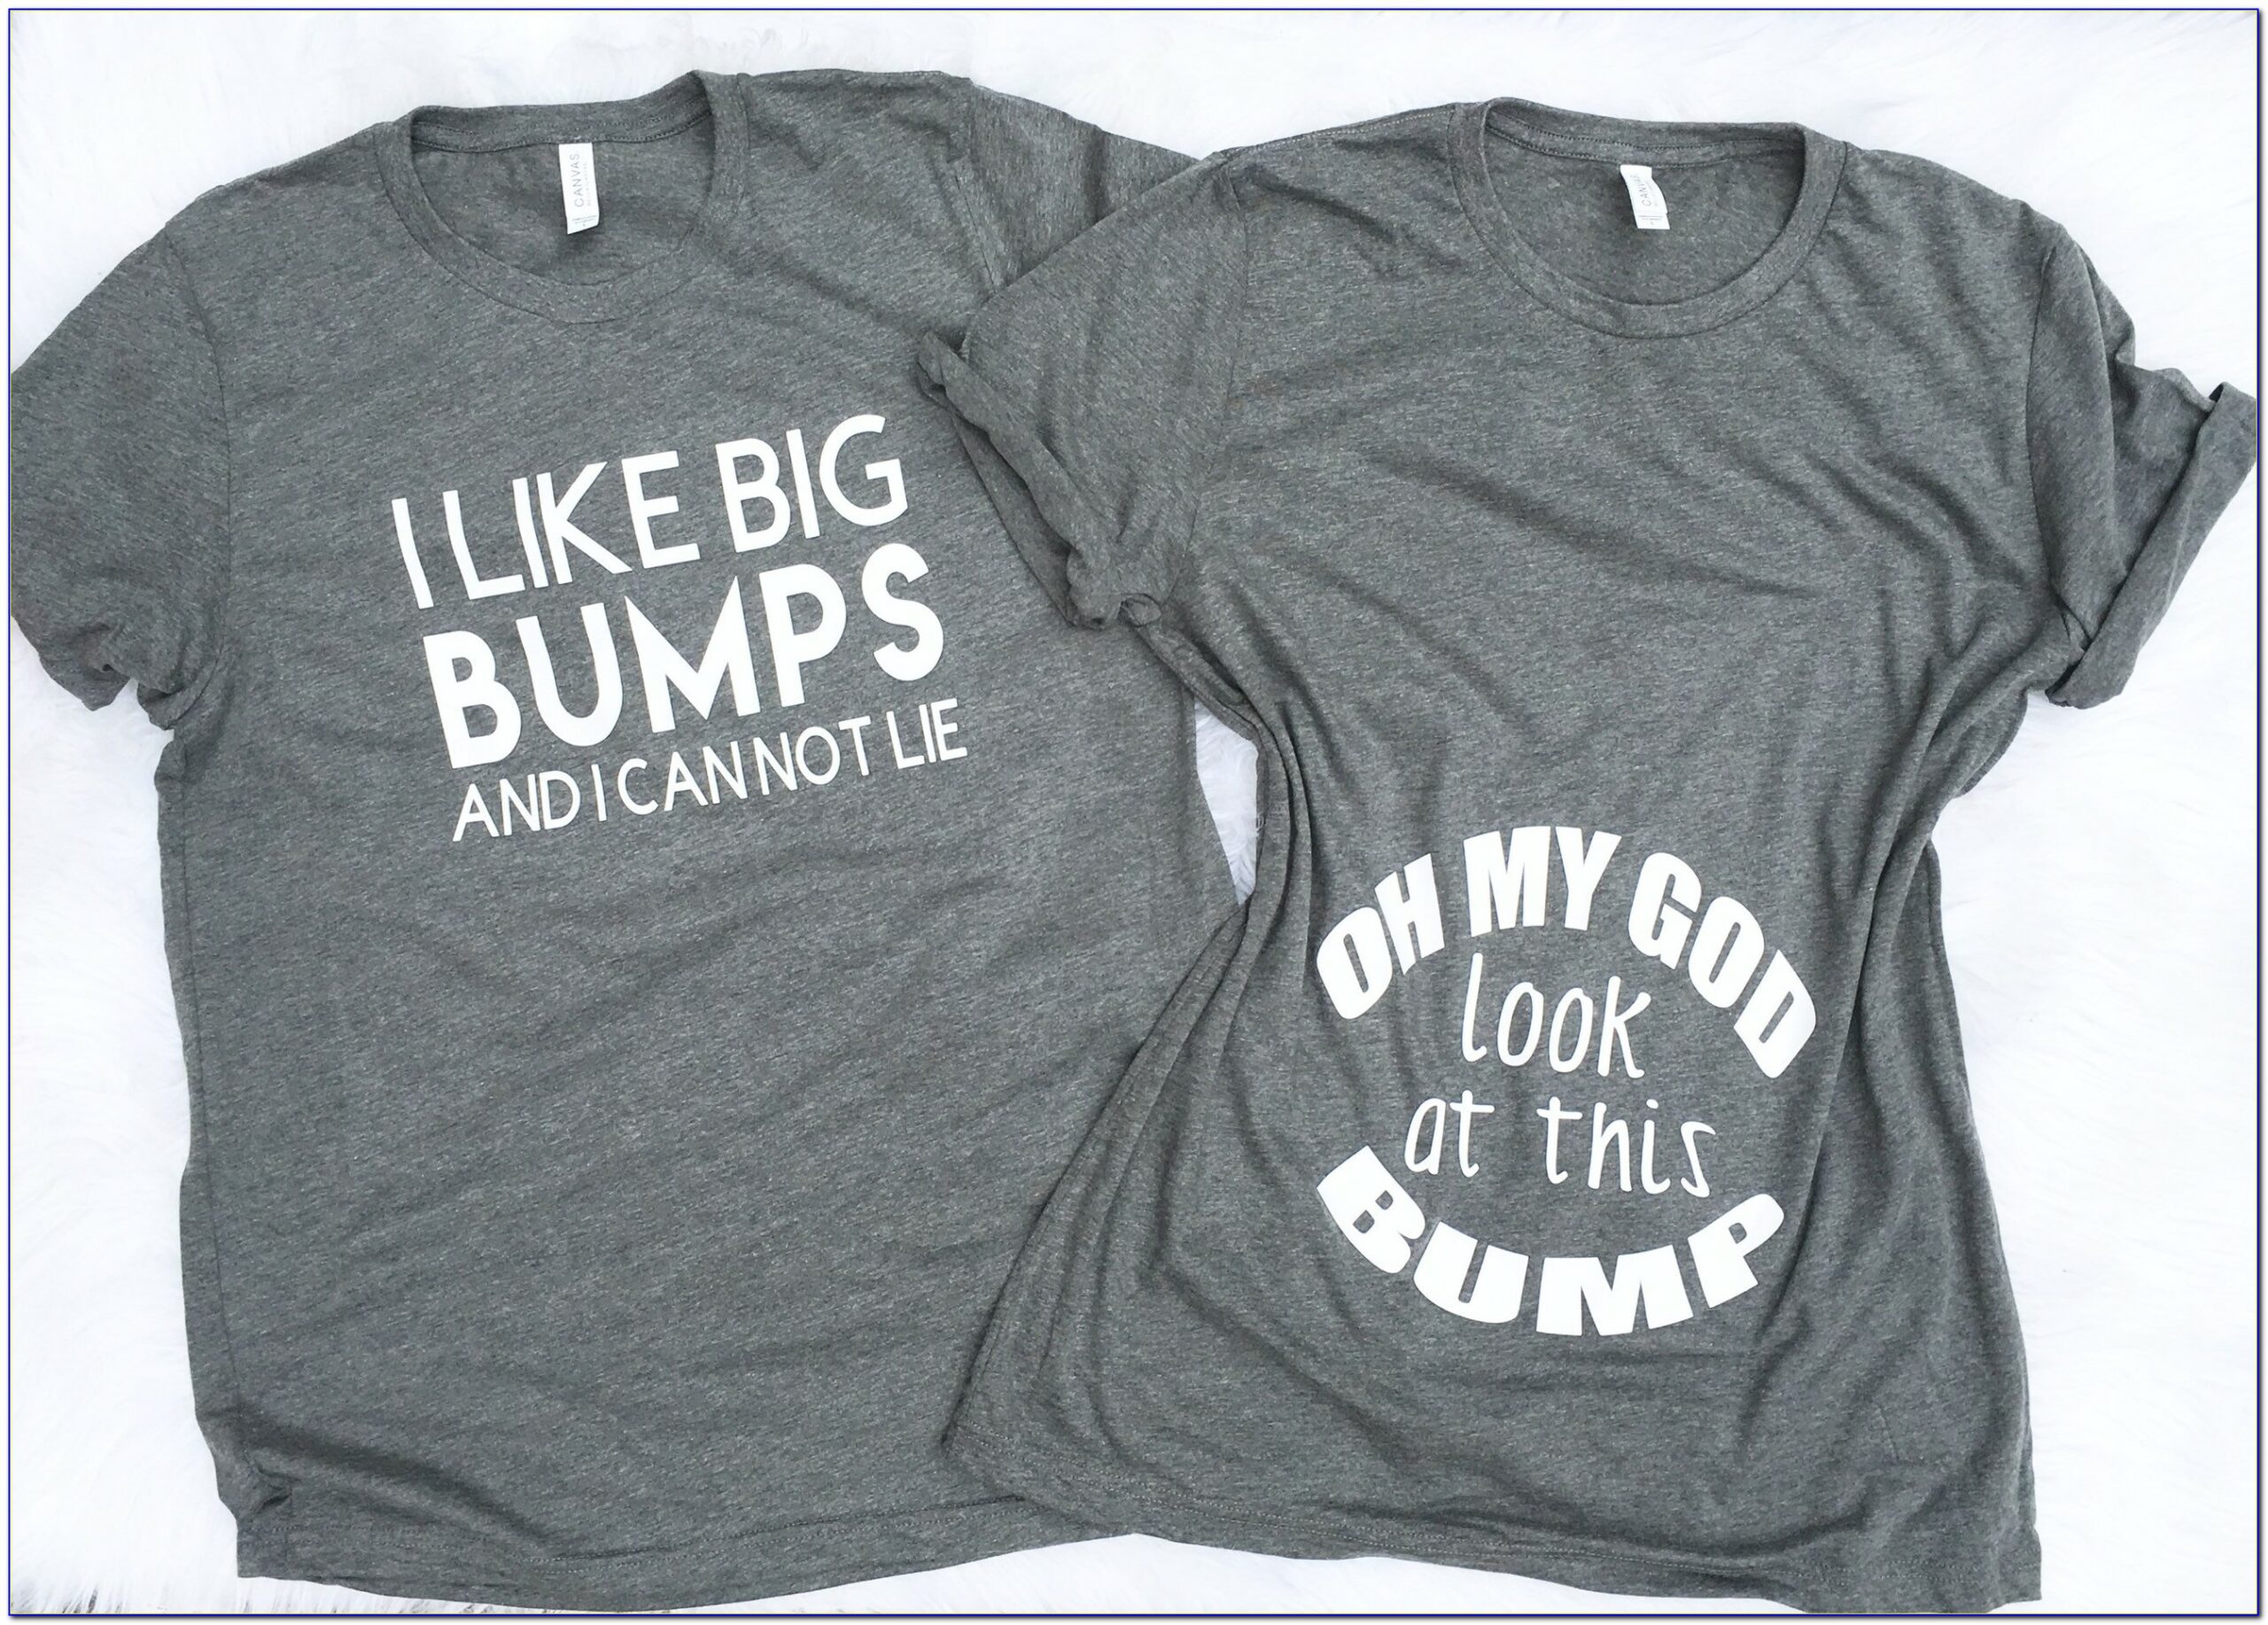 Pregnancy Announcement Shirts For Couples